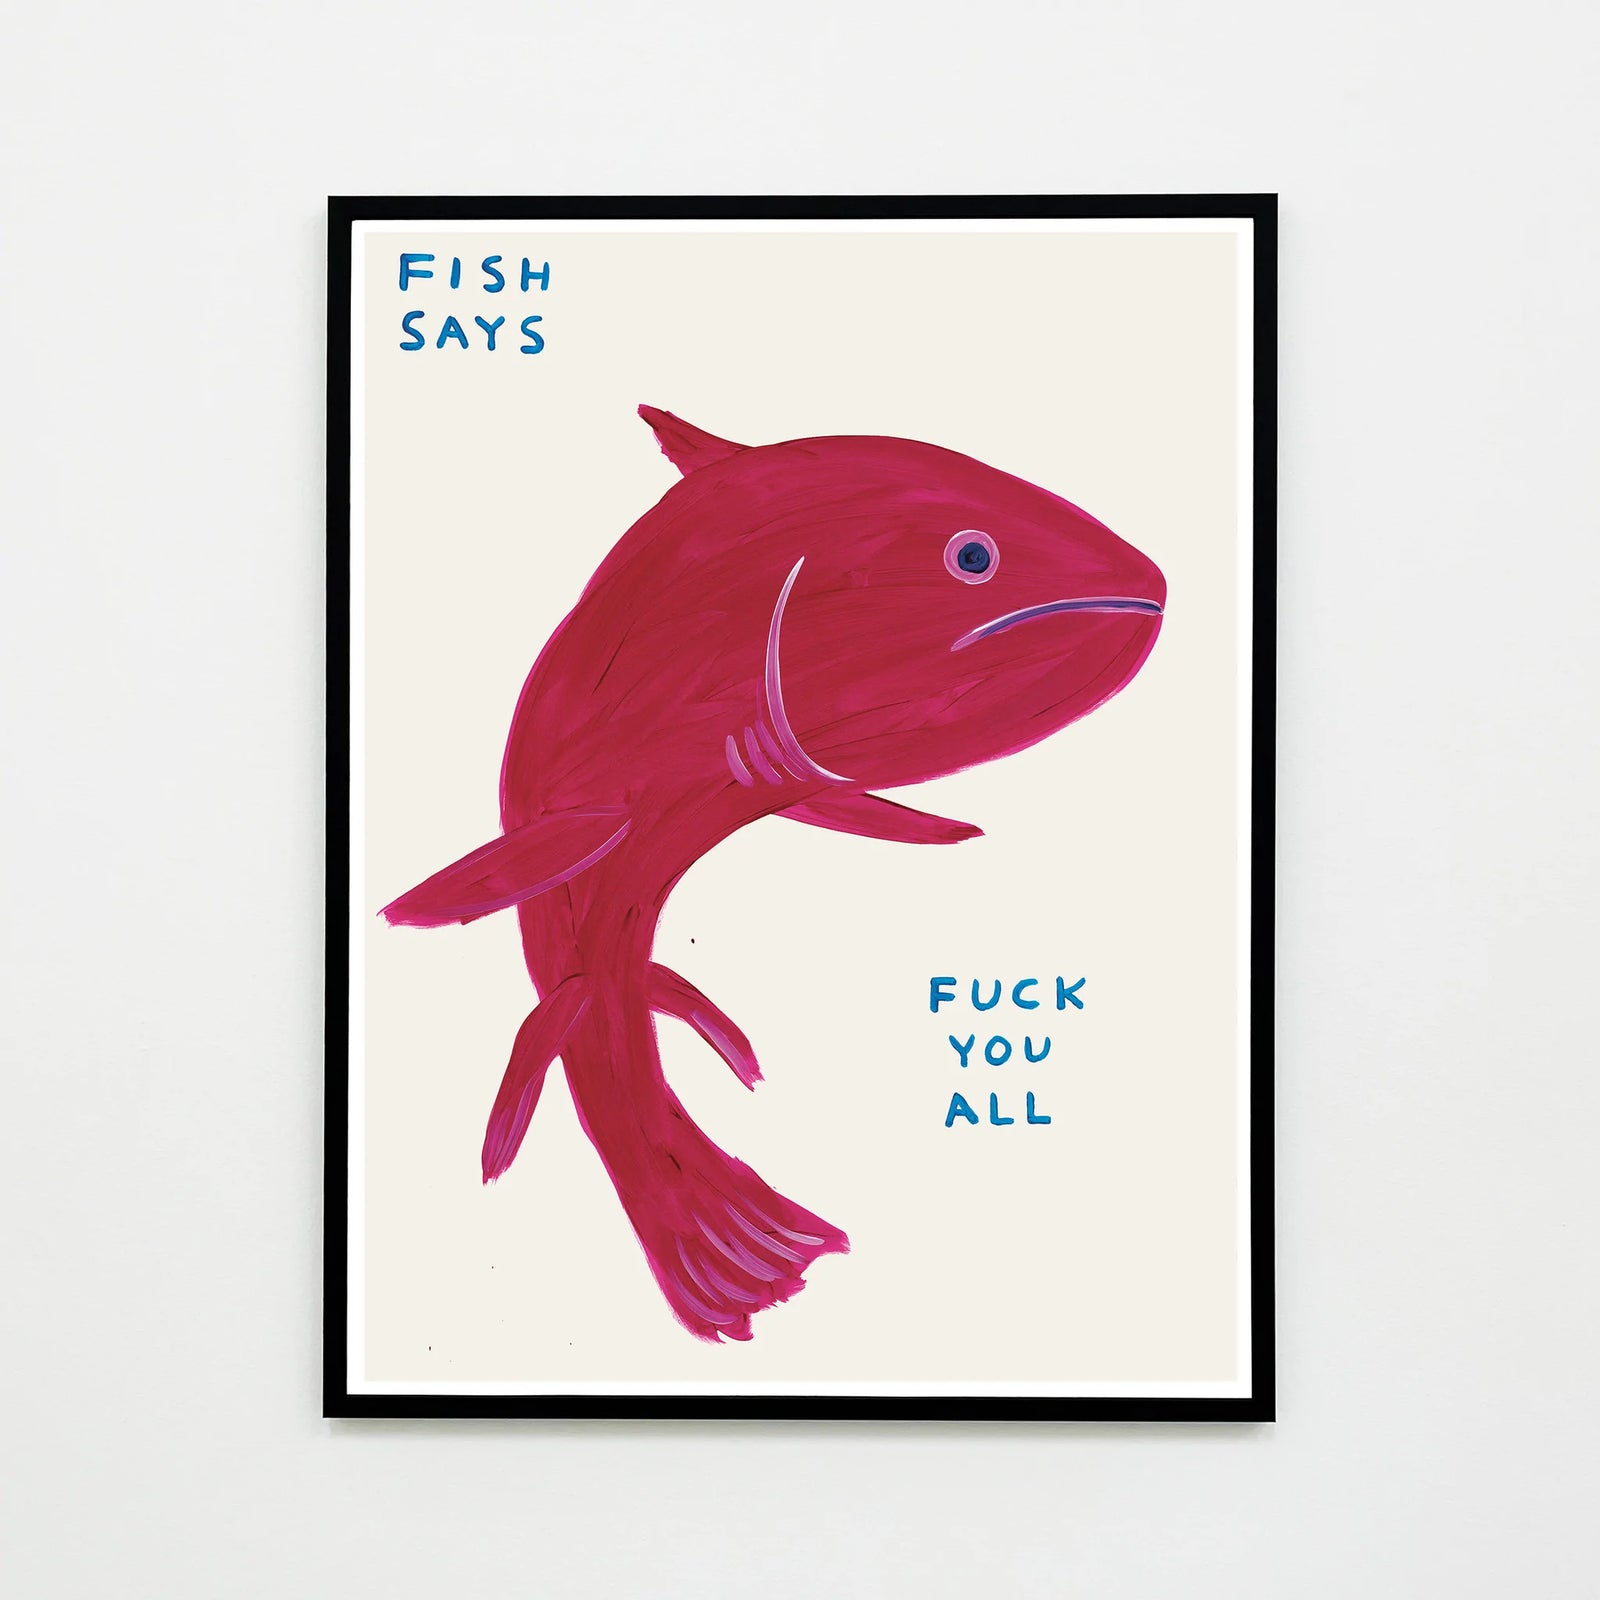 Art Prints and Wall Art £1000 - Electric Gallery Tagged "David Shrigley Posters"